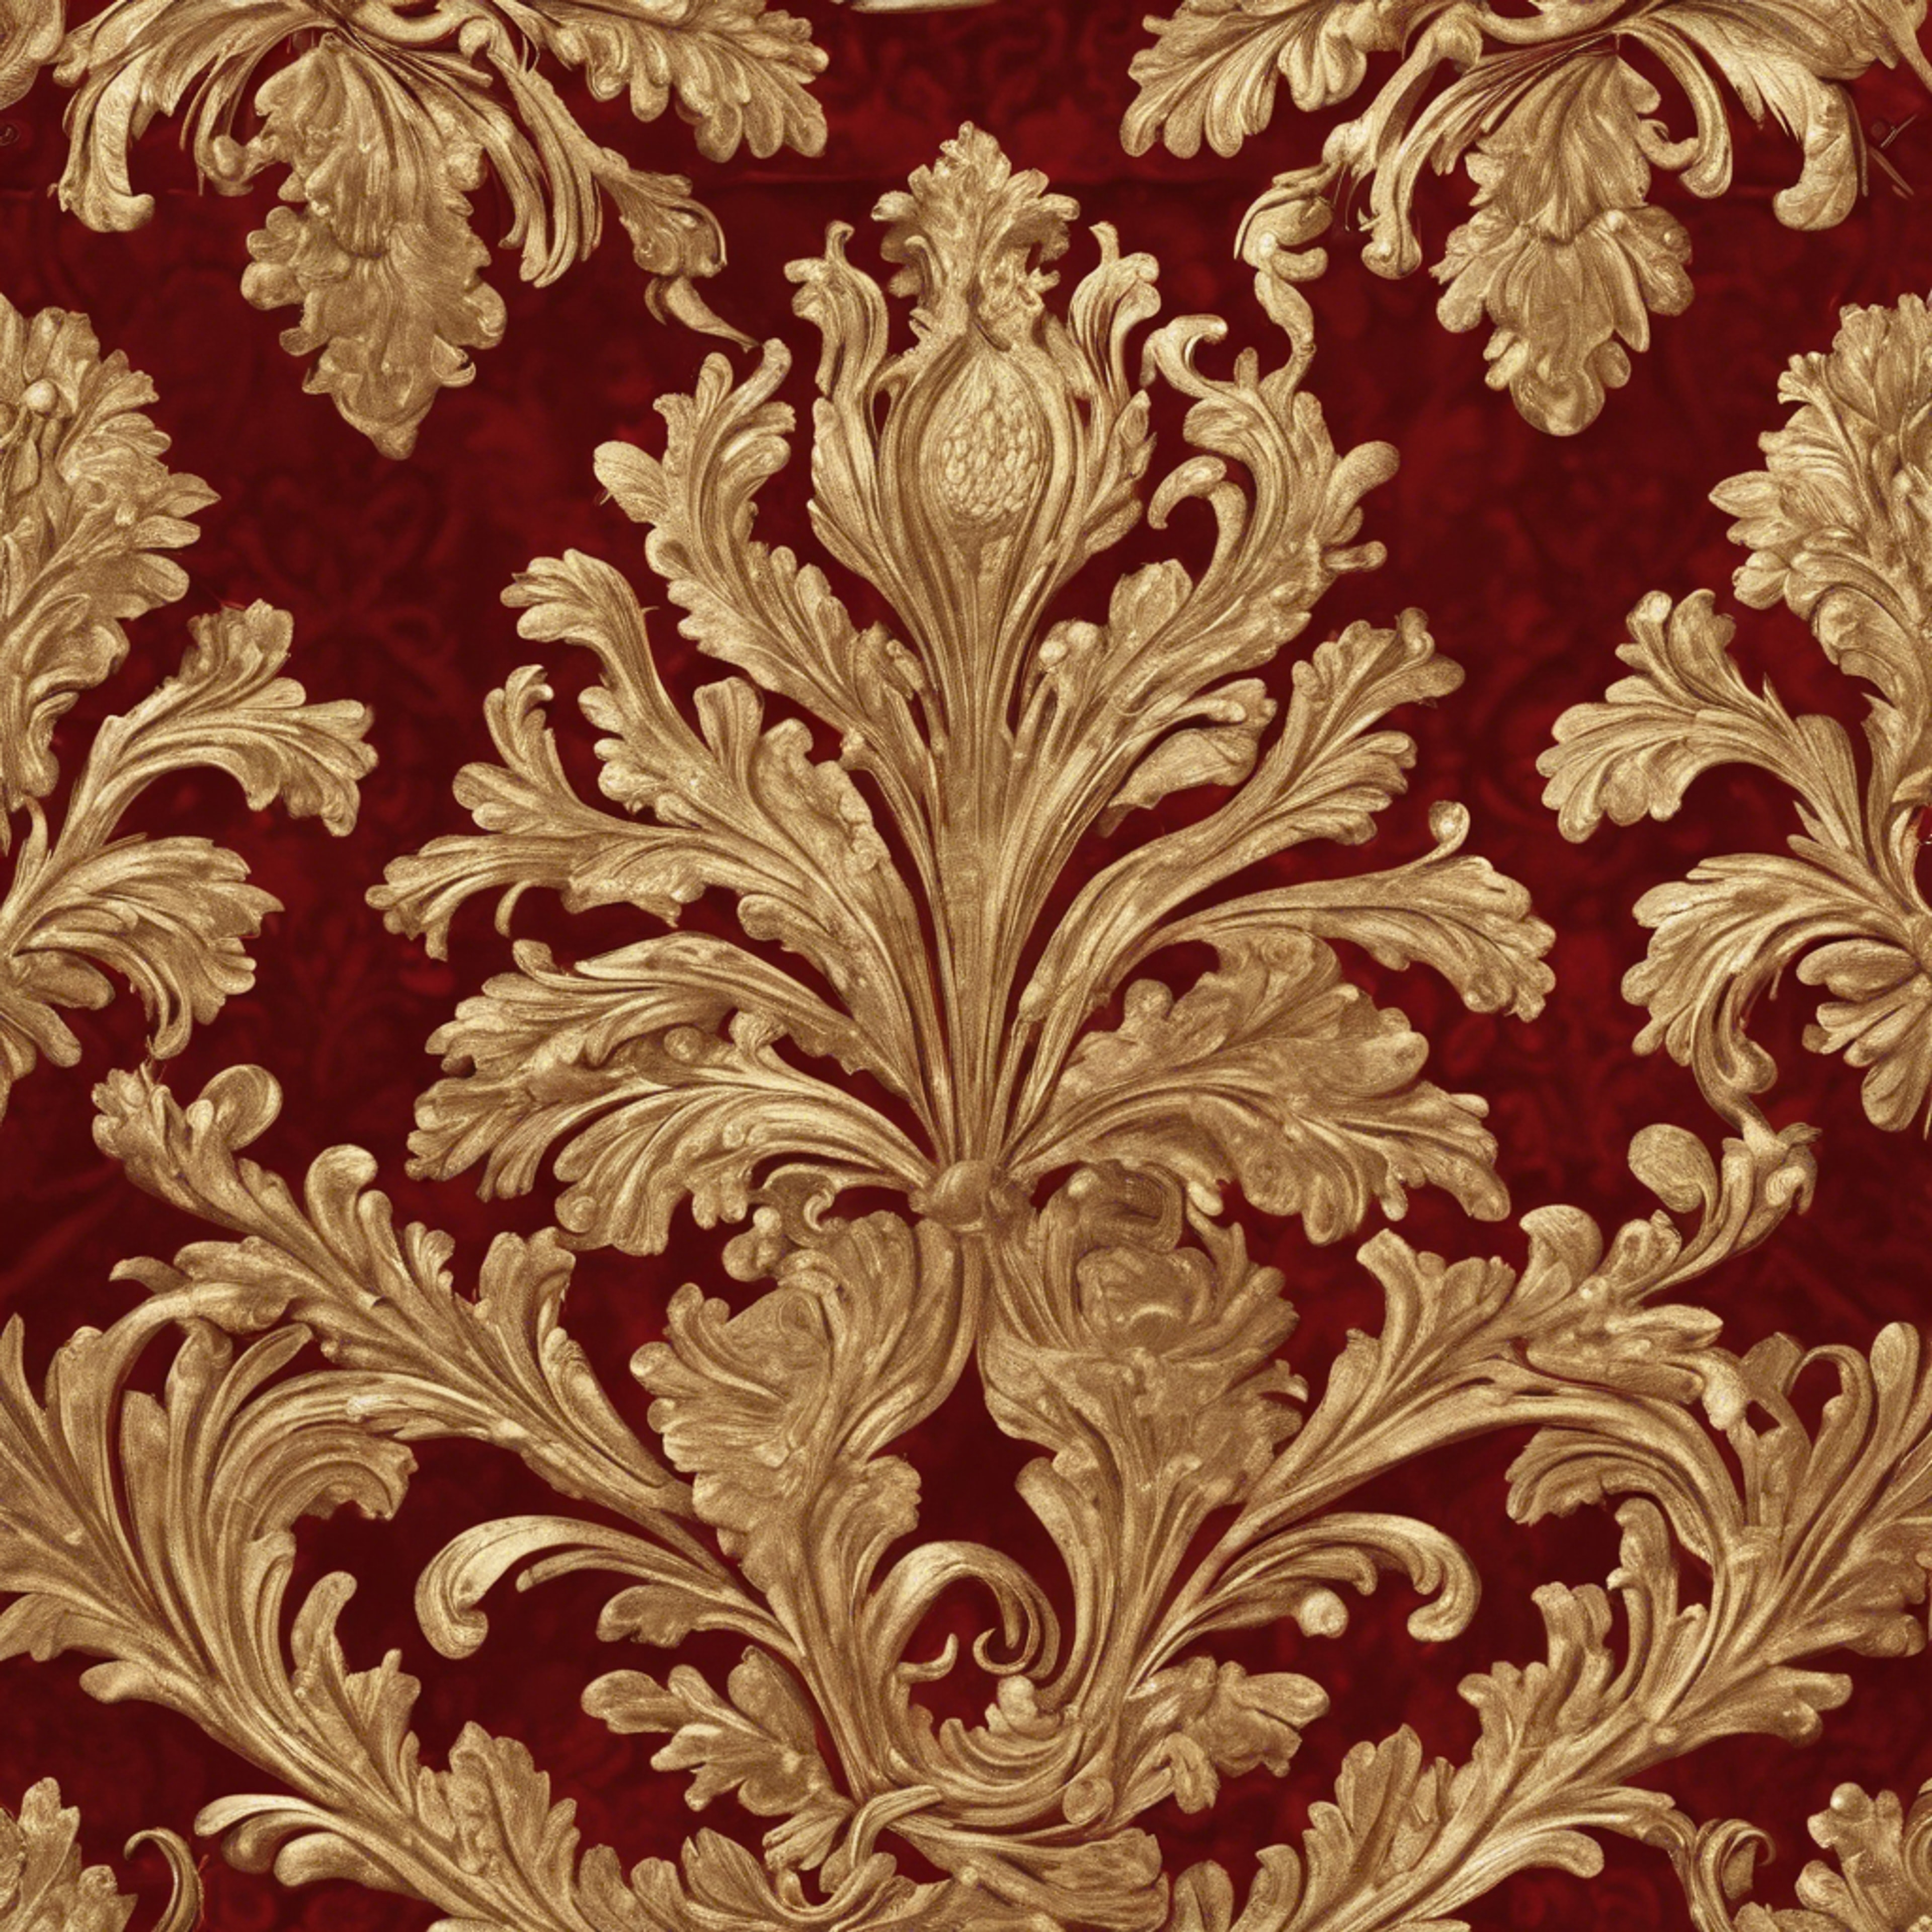 A dramatic seamless design of antique gold damask on a canvas of cardinal red velvet. Kertas dinding[ac0bd922427a4985975e]